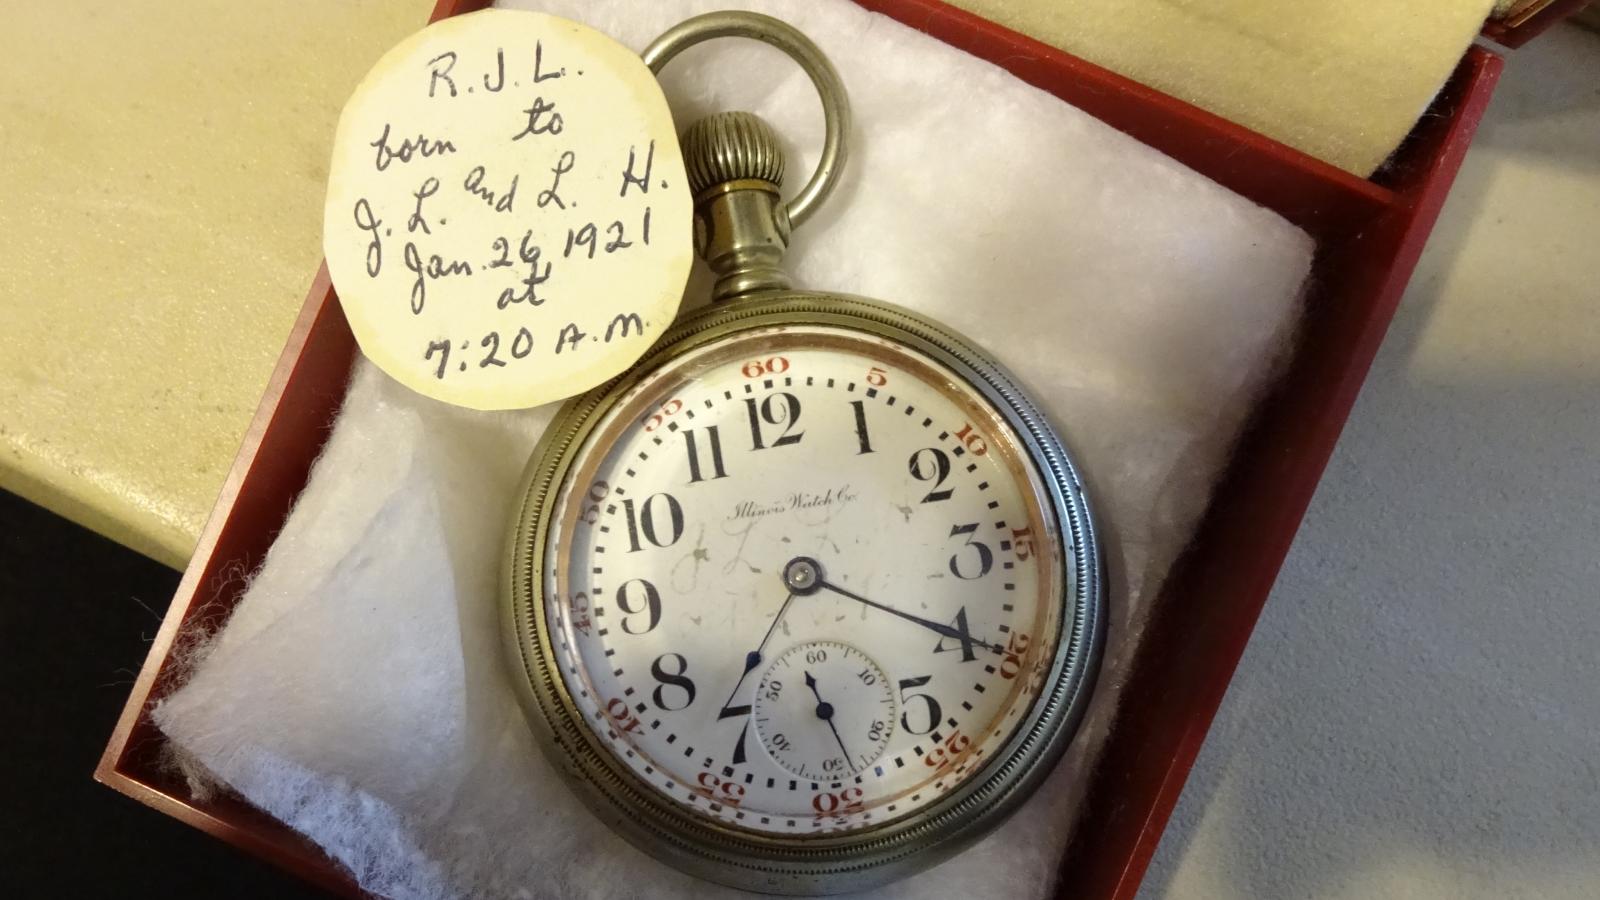 Photo of commemorative watch, stopped at the time of the birth of Jacob and Lenora’s son, Robert. 